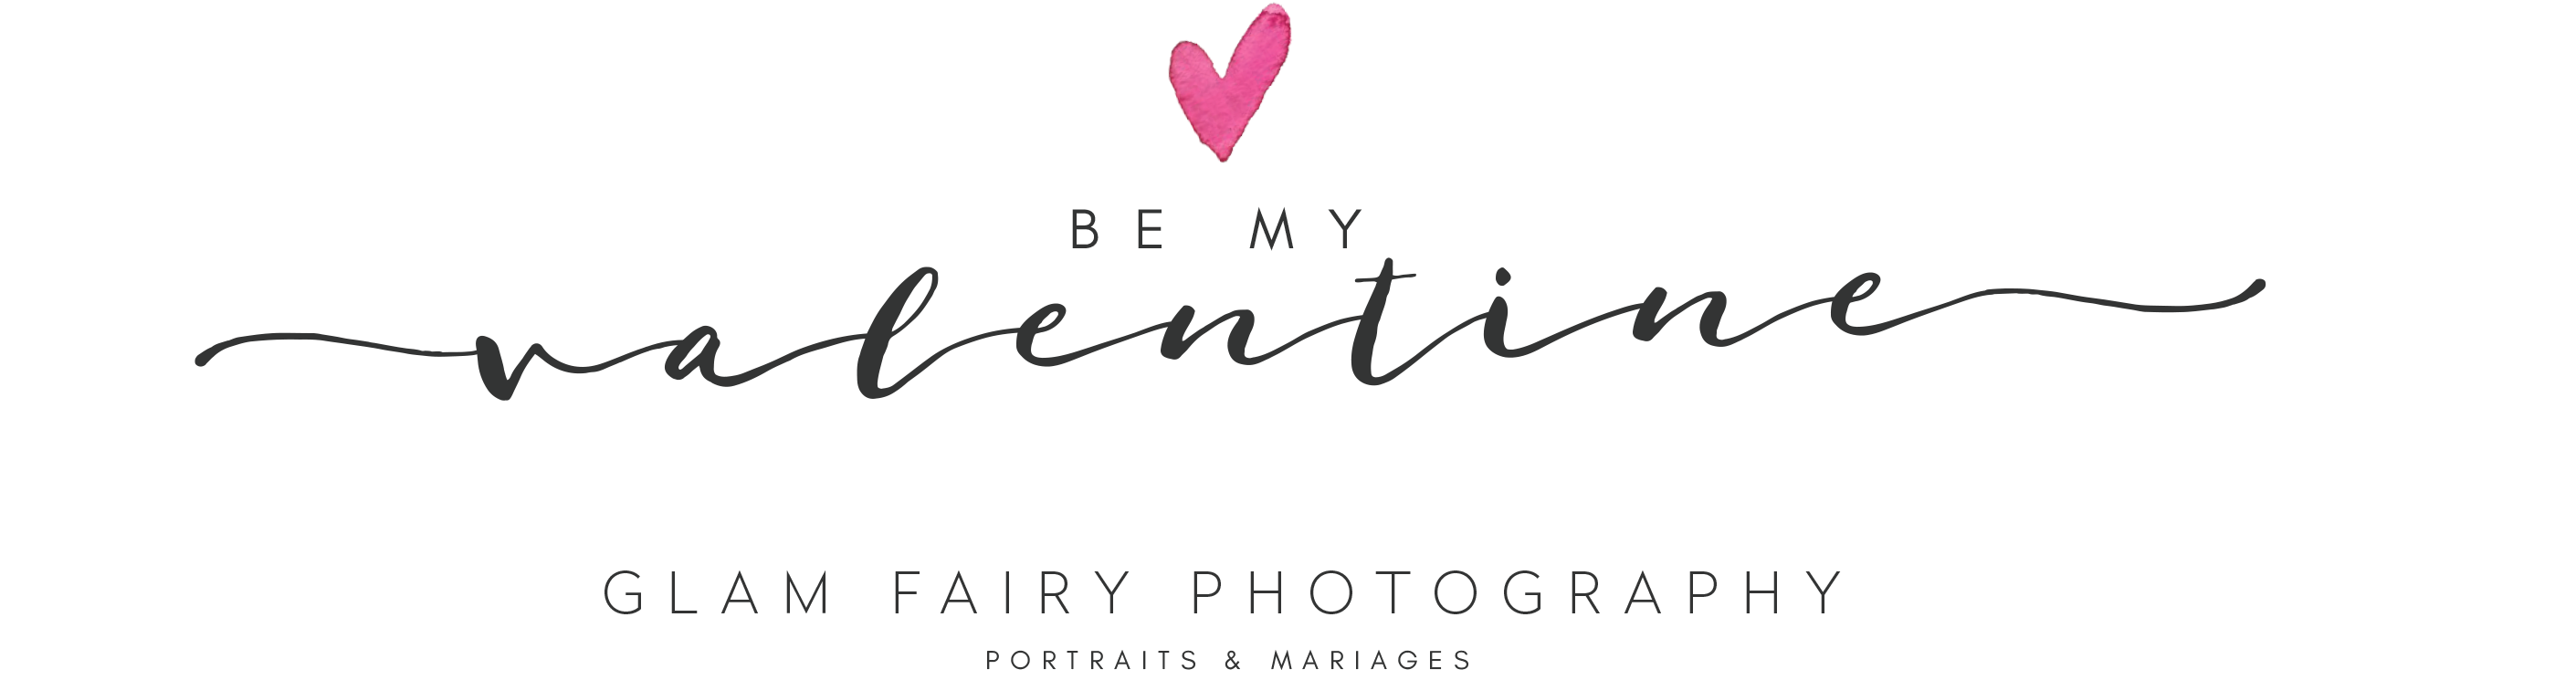 Glam Fairy Photography - Offre seance photo special saint valentin